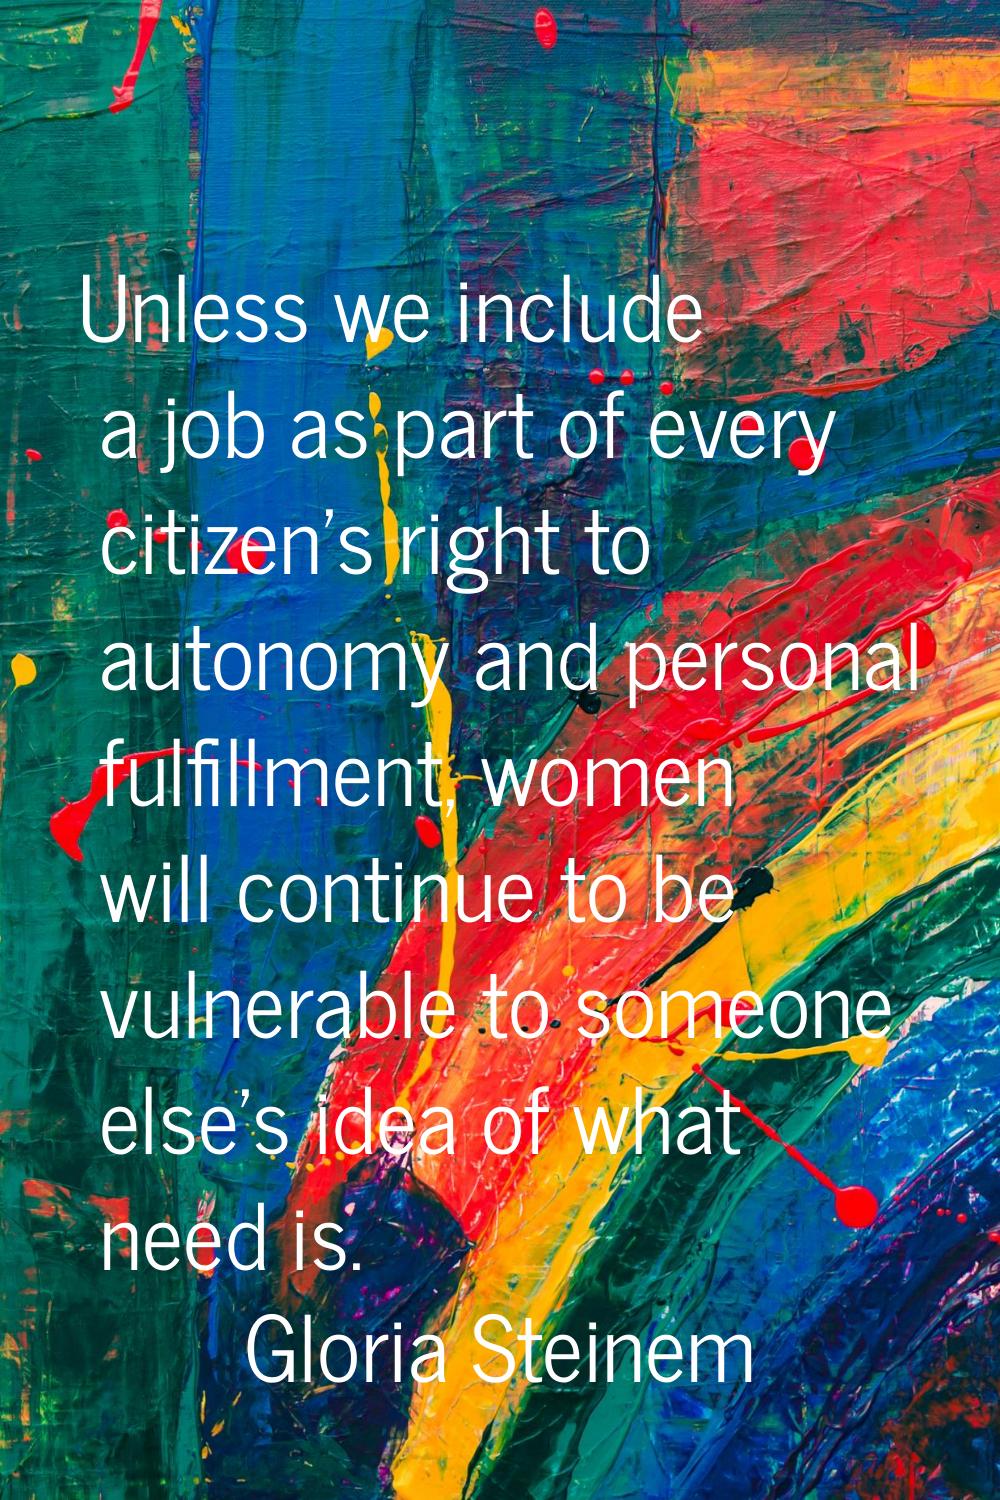 Unless we include a job as part of every citizen's right to autonomy and personal fulfillment, wome